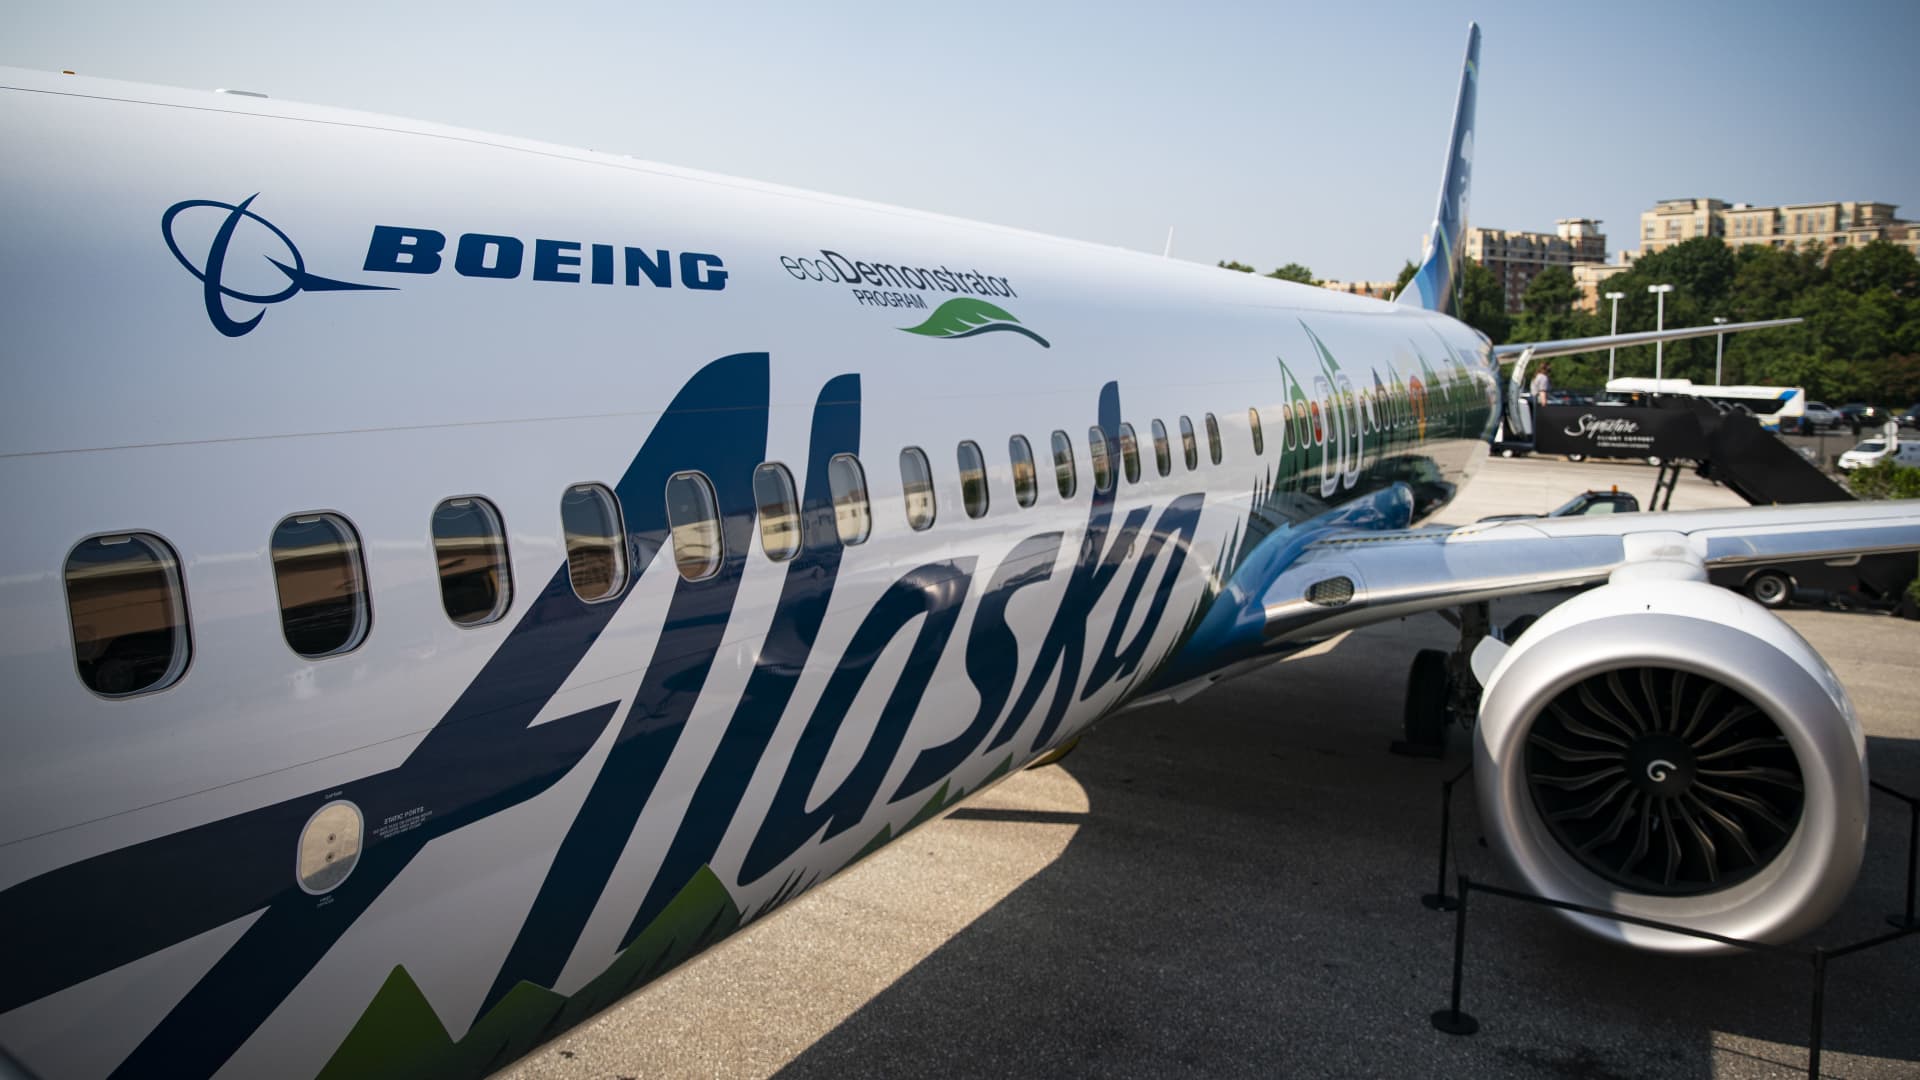 A Boeing Co. 737-9 aircraft during a Boeing Co. ecoDemonstrator program tour at Ronald Reagan National Airport (DCA) in Arlington, Virginia, U.S., on Wednesday, July 28, 2021.